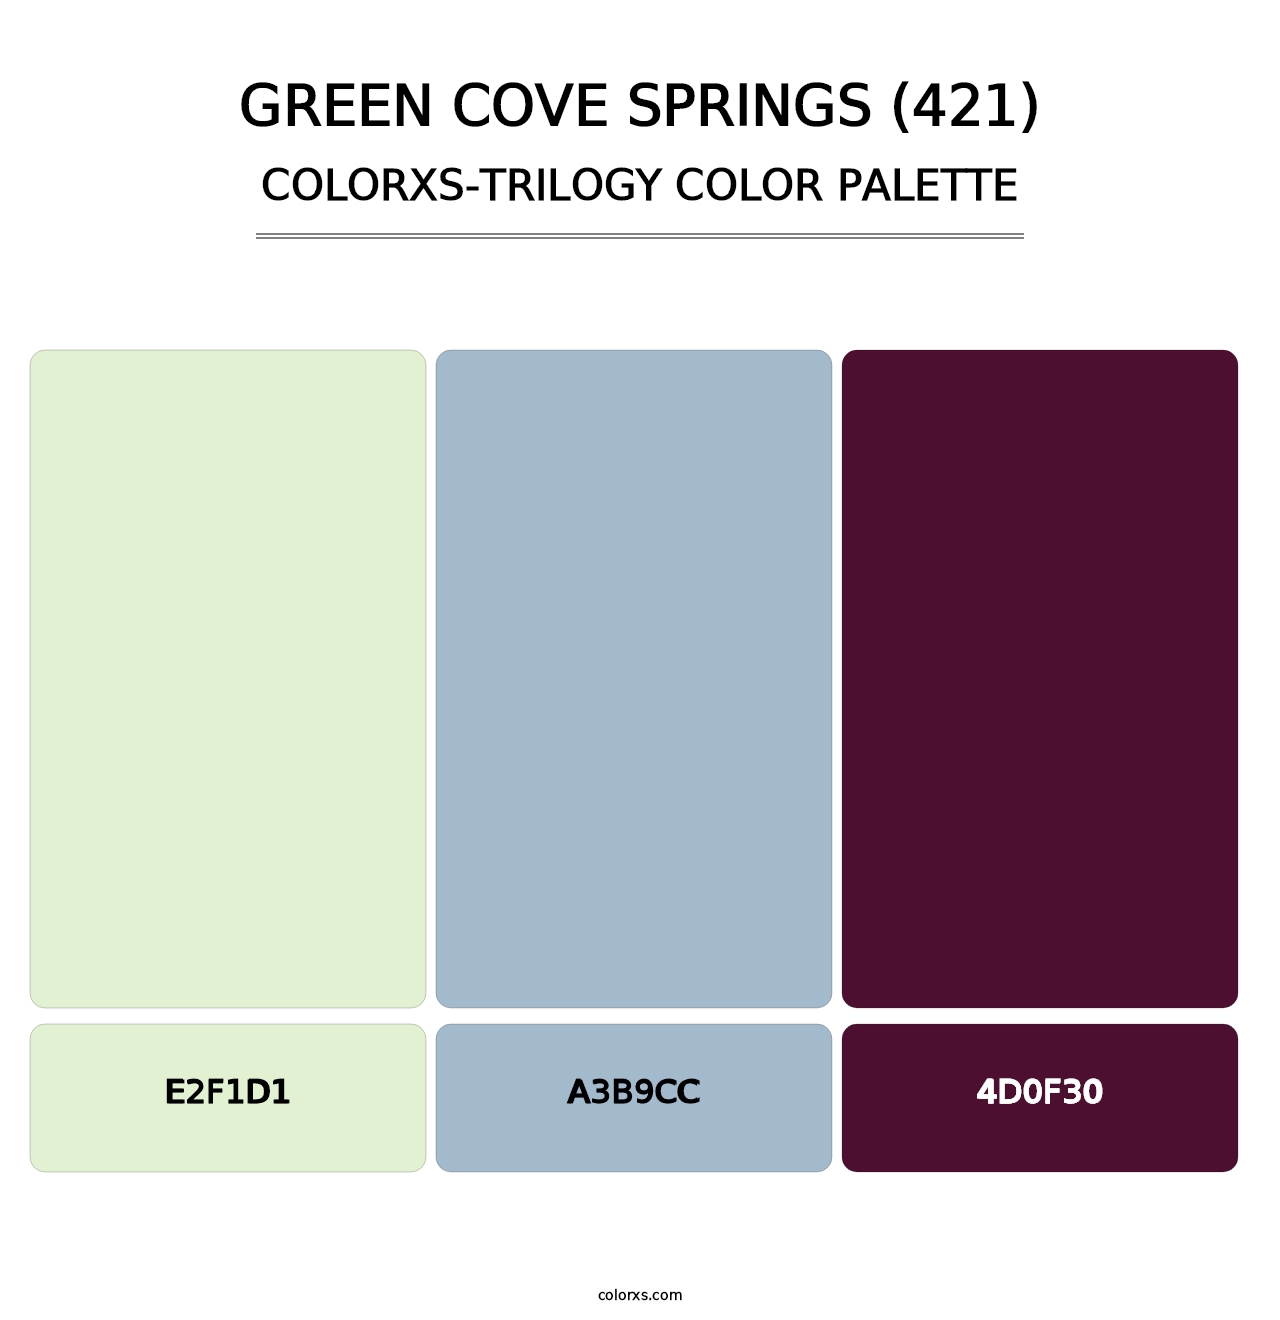 Green Cove Springs (421) - Colorxs Trilogy Palette